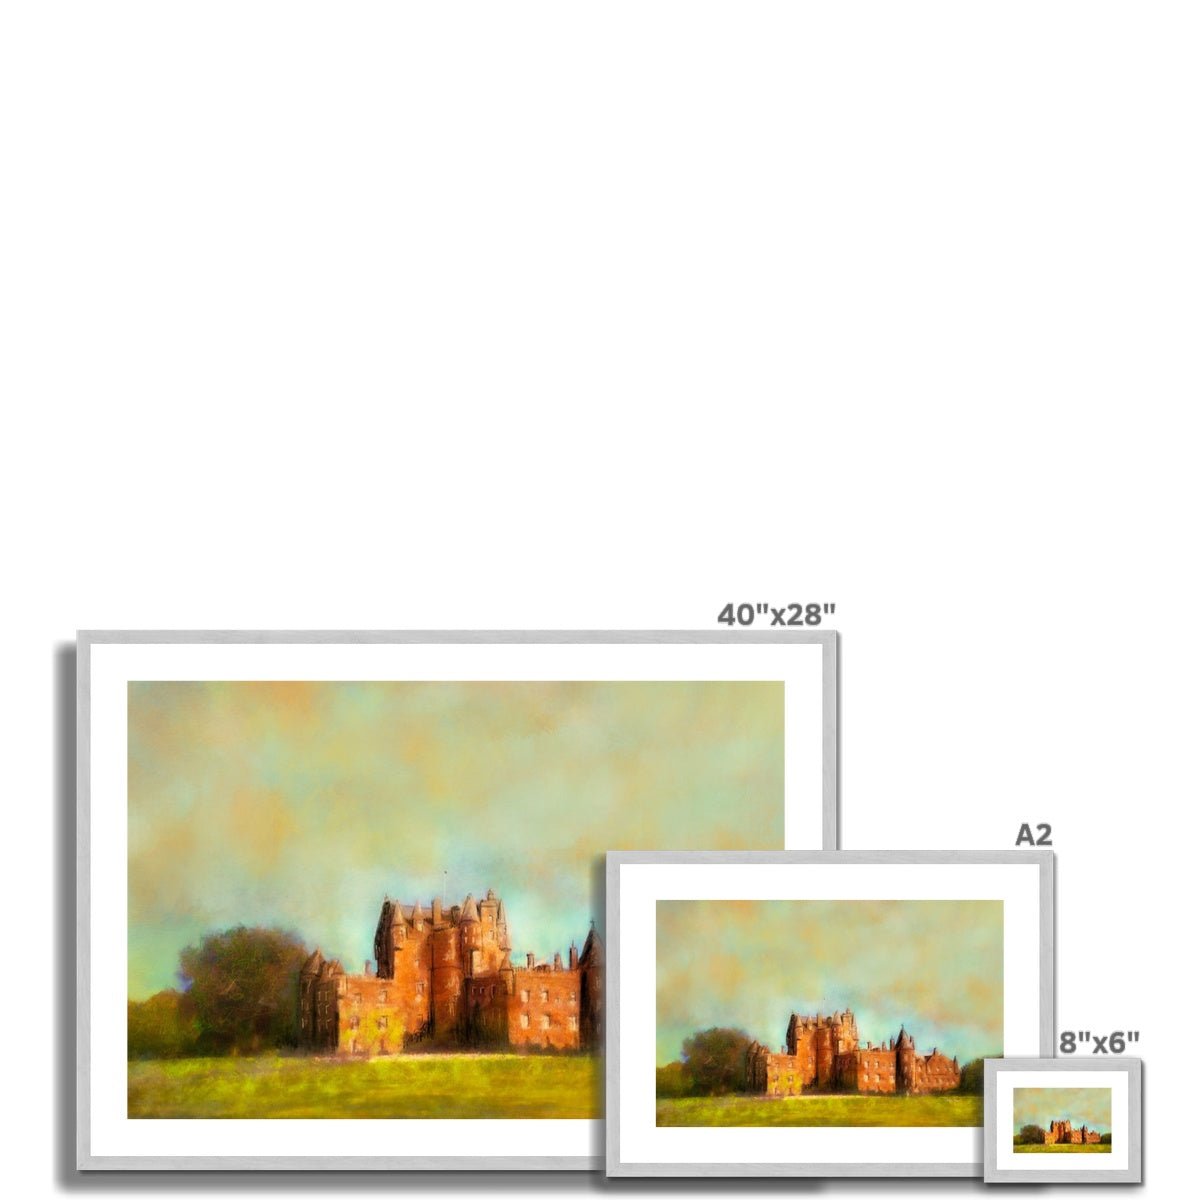 Glamis Castle Painting | Antique Framed & Mounted Prints From Scotland-Antique Framed & Mounted Prints-Scottish Castles Art Gallery-Paintings, Prints, Homeware, Art Gifts From Scotland By Scottish Artist Kevin Hunter